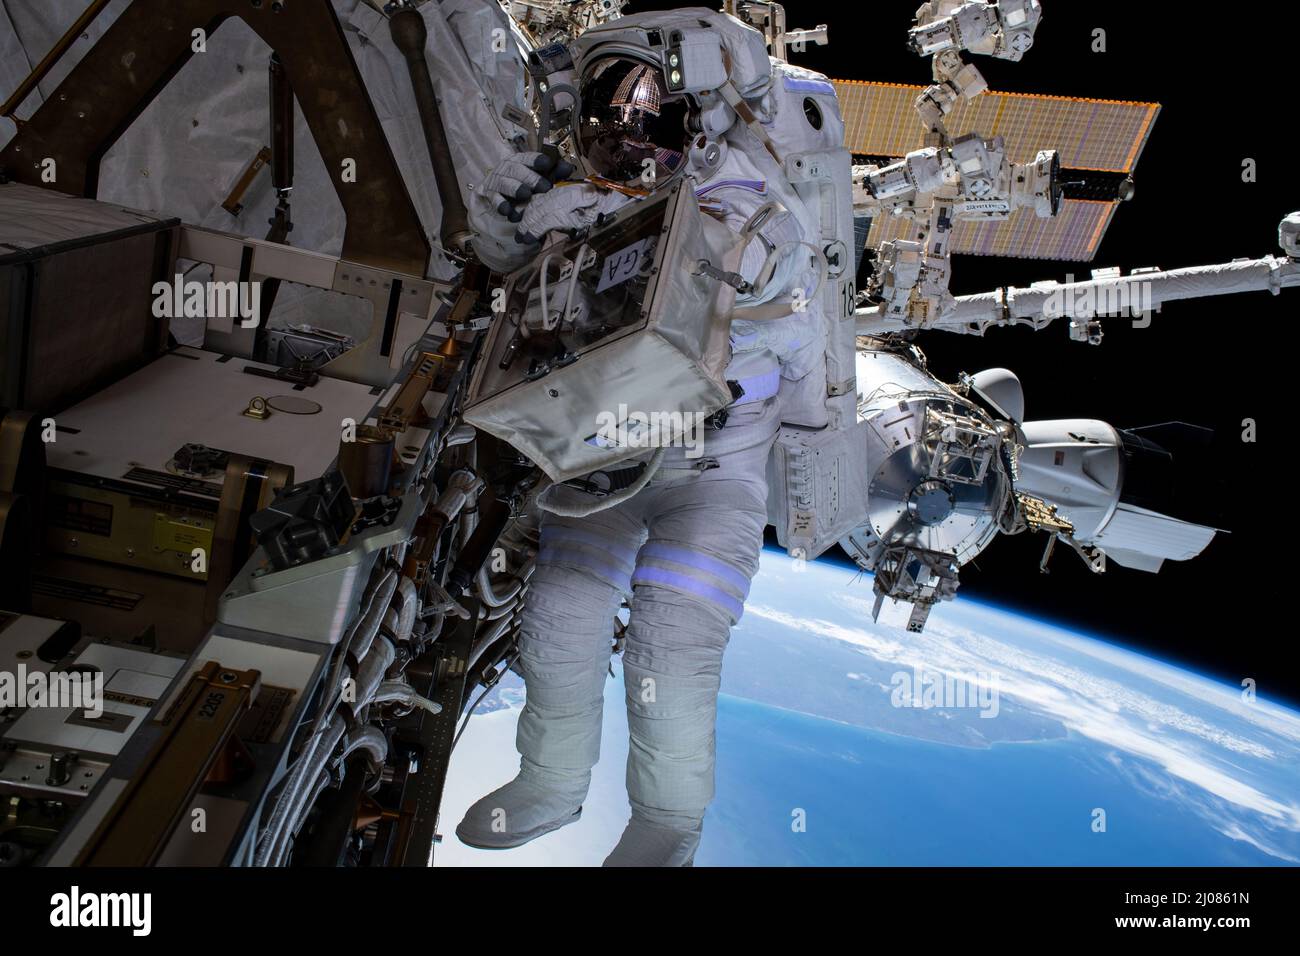 International Space Station, Earth Orbit. 15th Mar, 2022. International Space Station, EARTH ORBIT. 15 March, 2022. NASA astronaut Raja Chari, during a nearly 7 hour long spacewalk to prepare the International Space Station for the next roll-out solar array, March 15, 2022 in Earth Orbit. At right, is the SpaceX Crew Dragon Endurance docked to the Harmony module with the Atlantic coast of South America 268 miles below. Credit: NASA/NASA/Alamy Live News Stock Photo